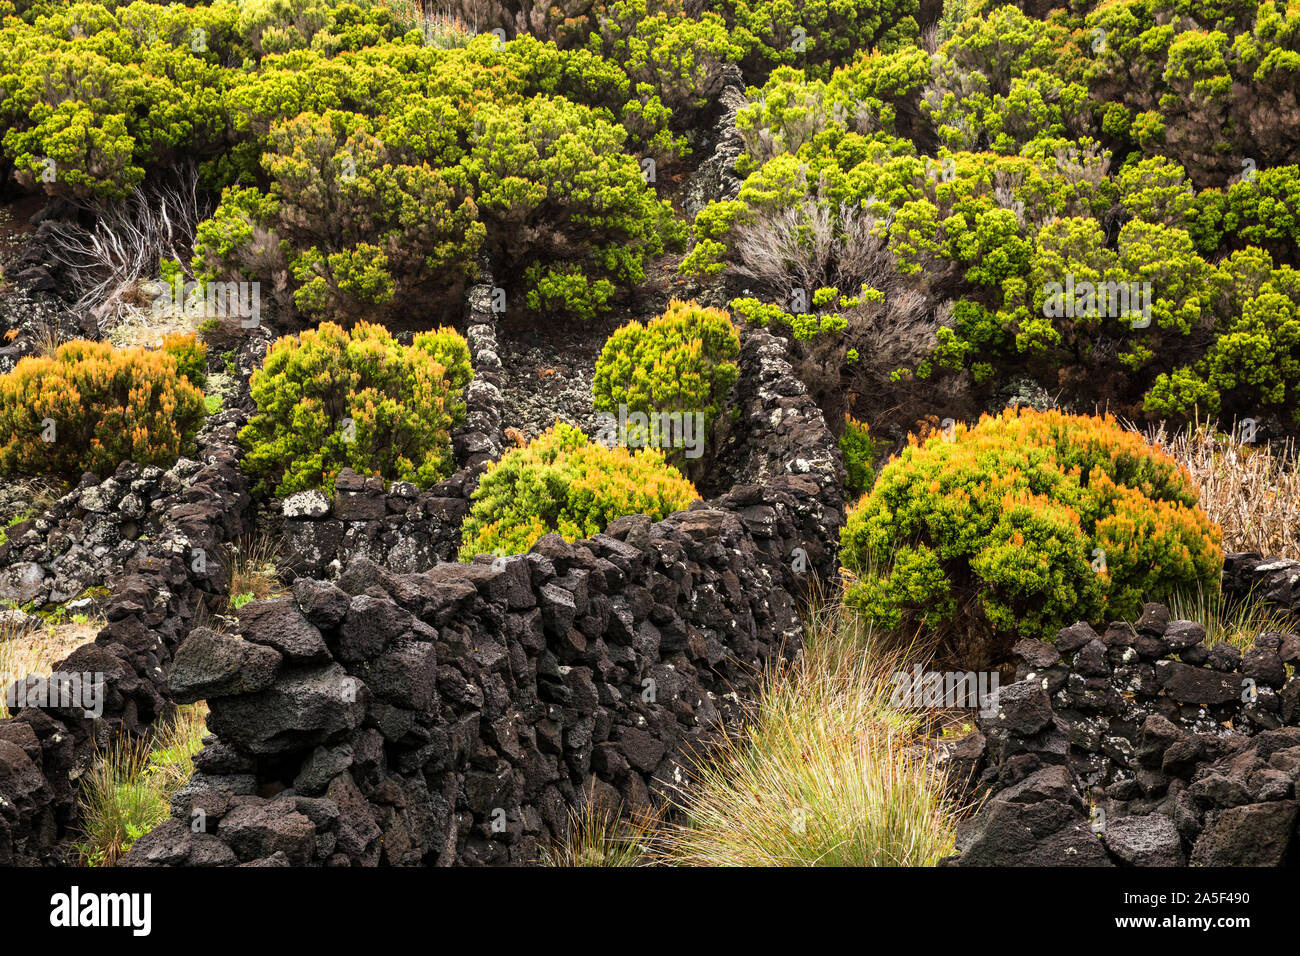 Vegetation growing between walls made of volcanic rock in Pico. Azores, Portugal Stock Photo